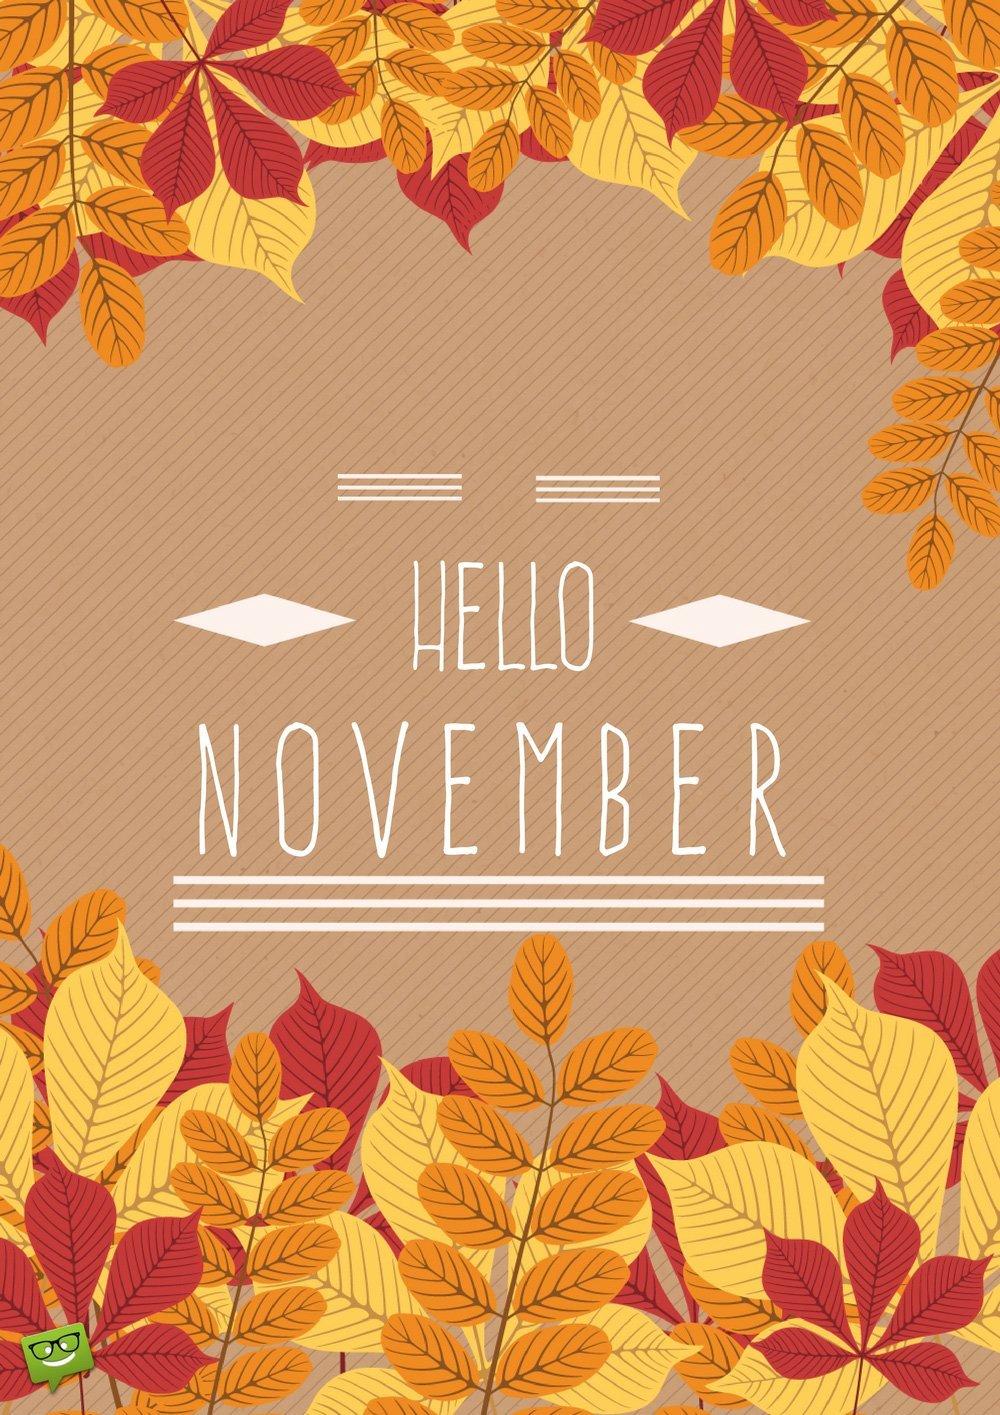 November Wallpaper for Mobile iPhone Android